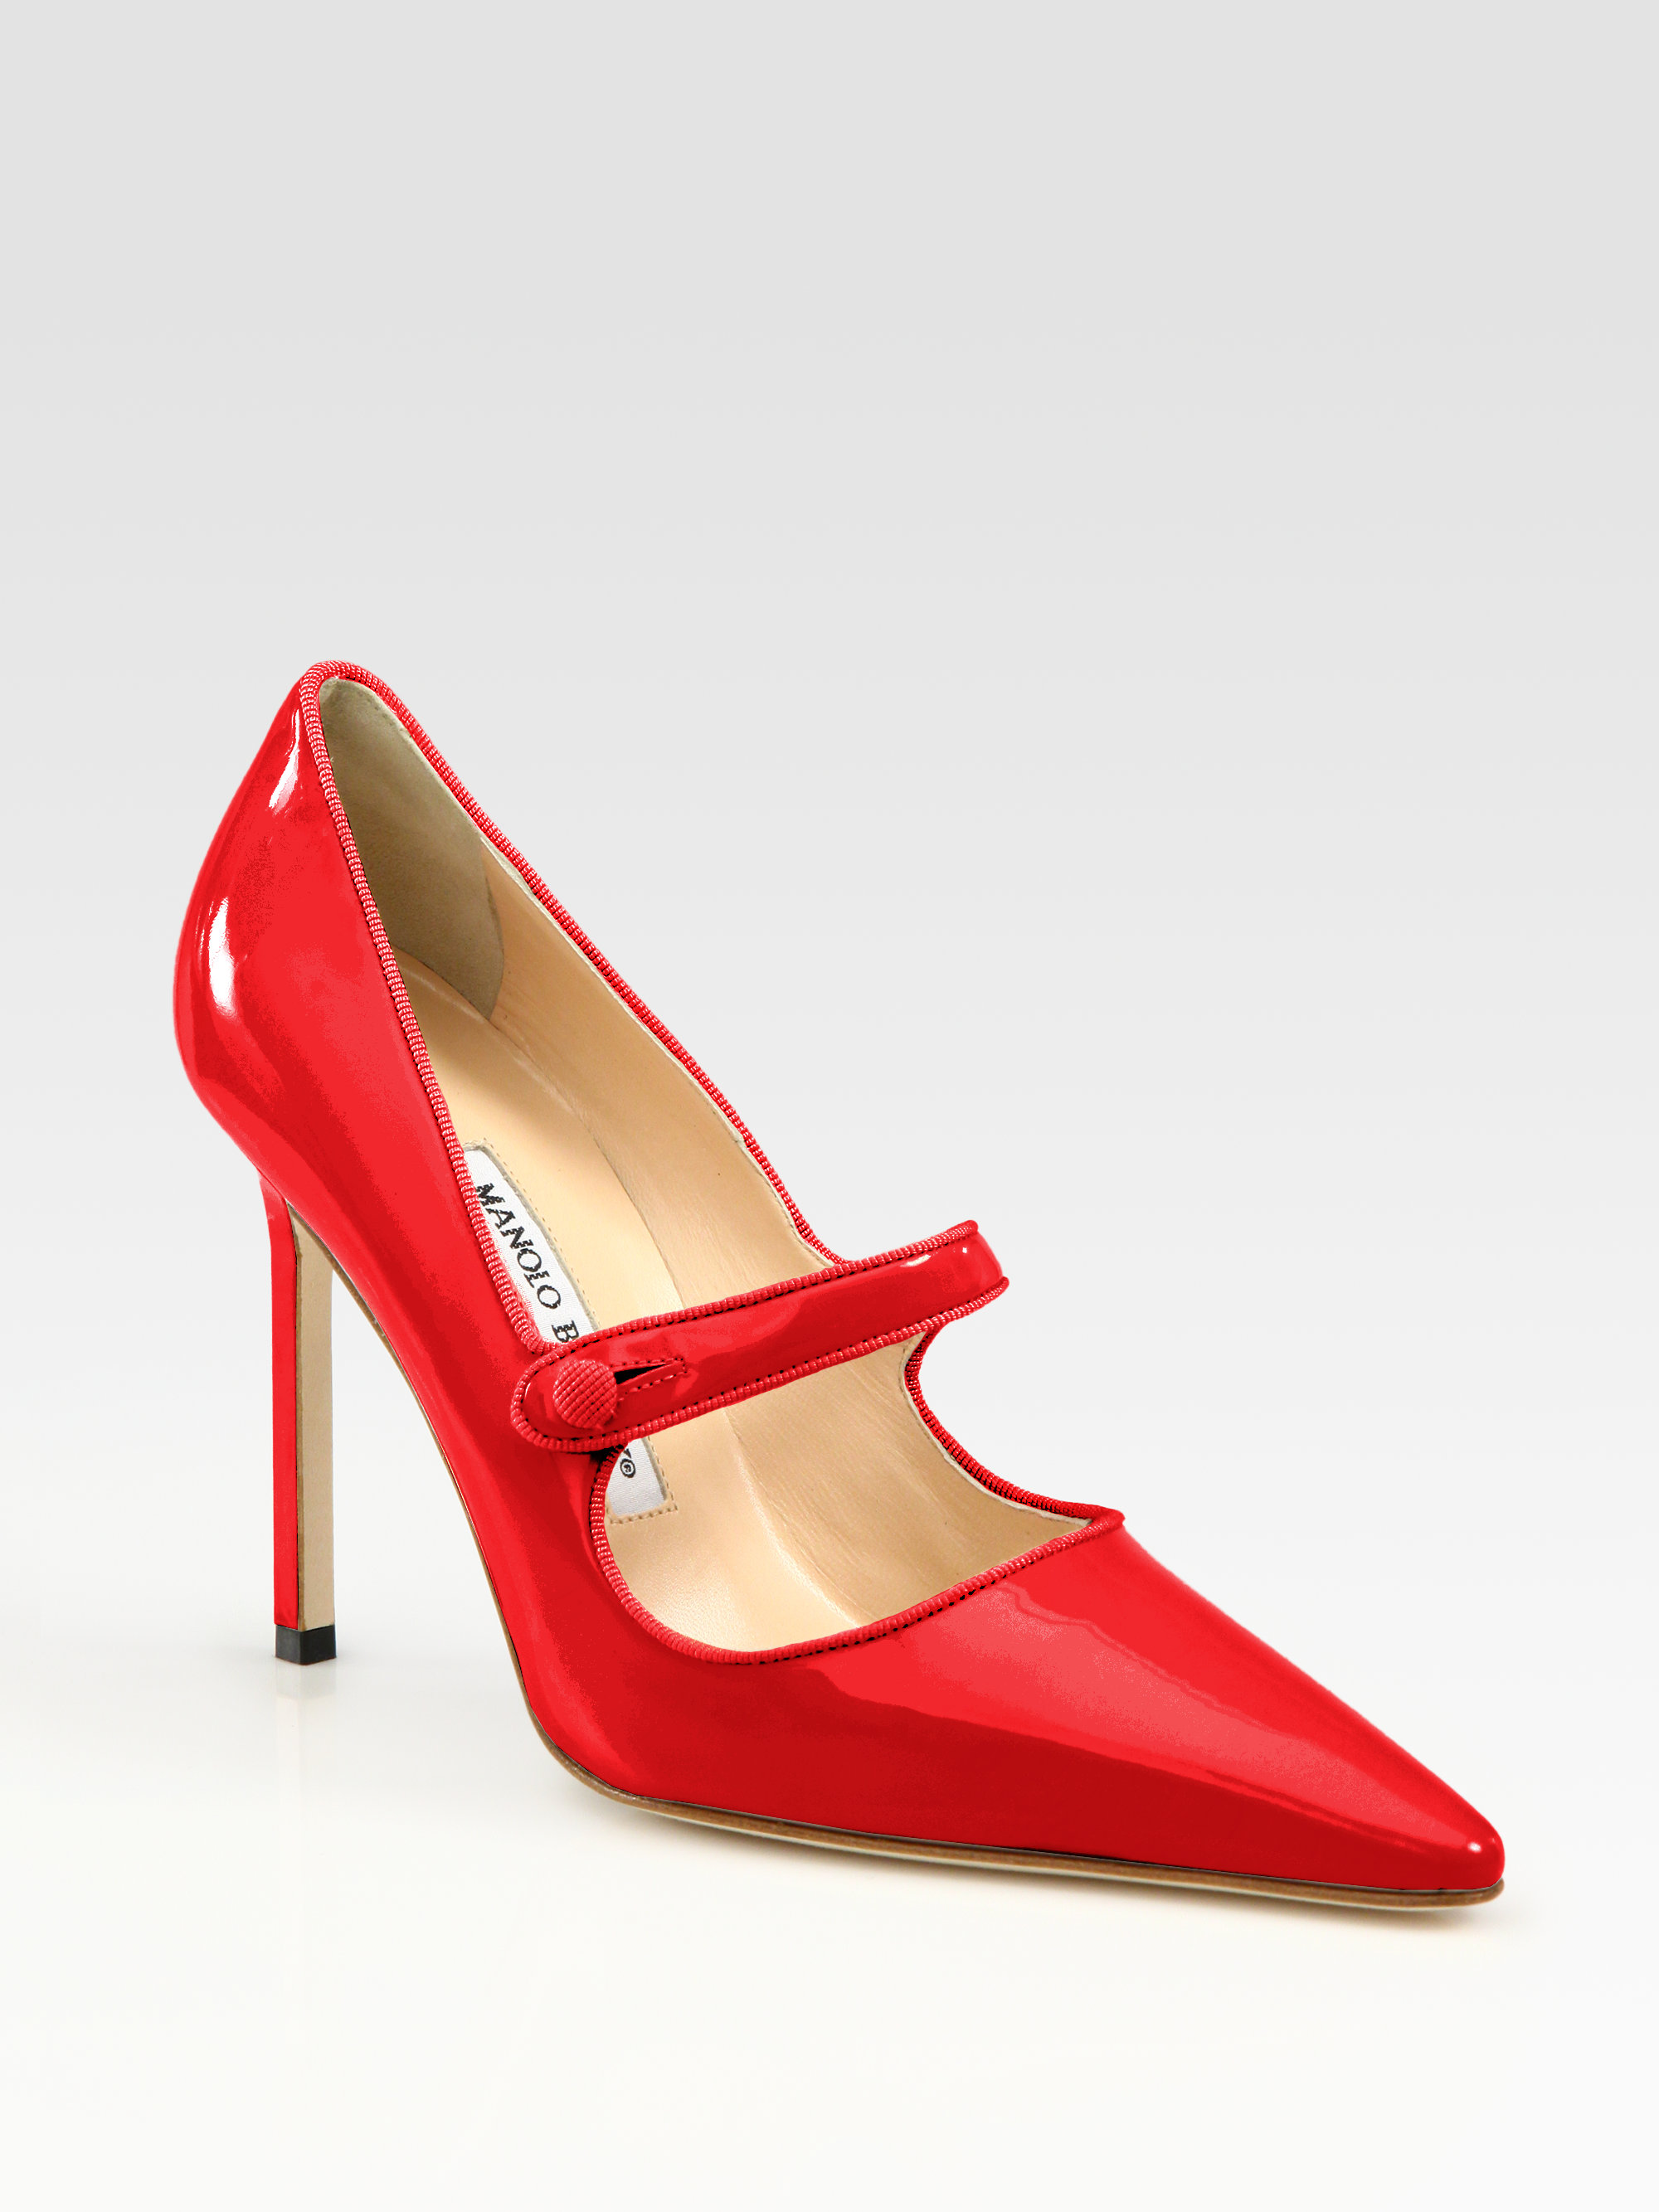 Manolo Blahnik Campari Patent Leather Mary Jane Pumps In Red Lyst